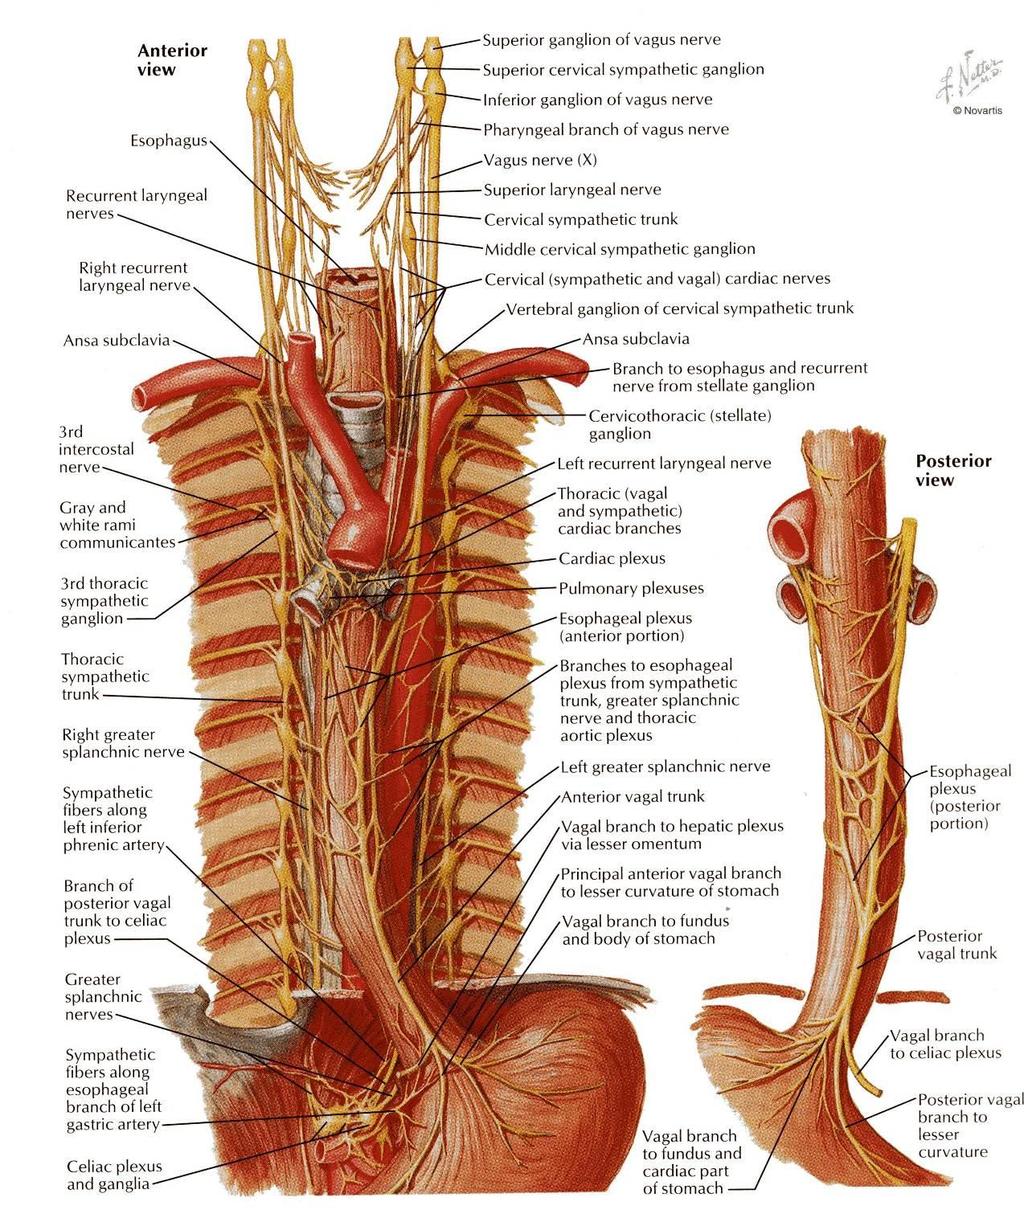 NERVE SUPPLY It is supplied by sympathetic fibers from the sympathetic trunks. The parasympathetic supply comes form the vagus nerves.